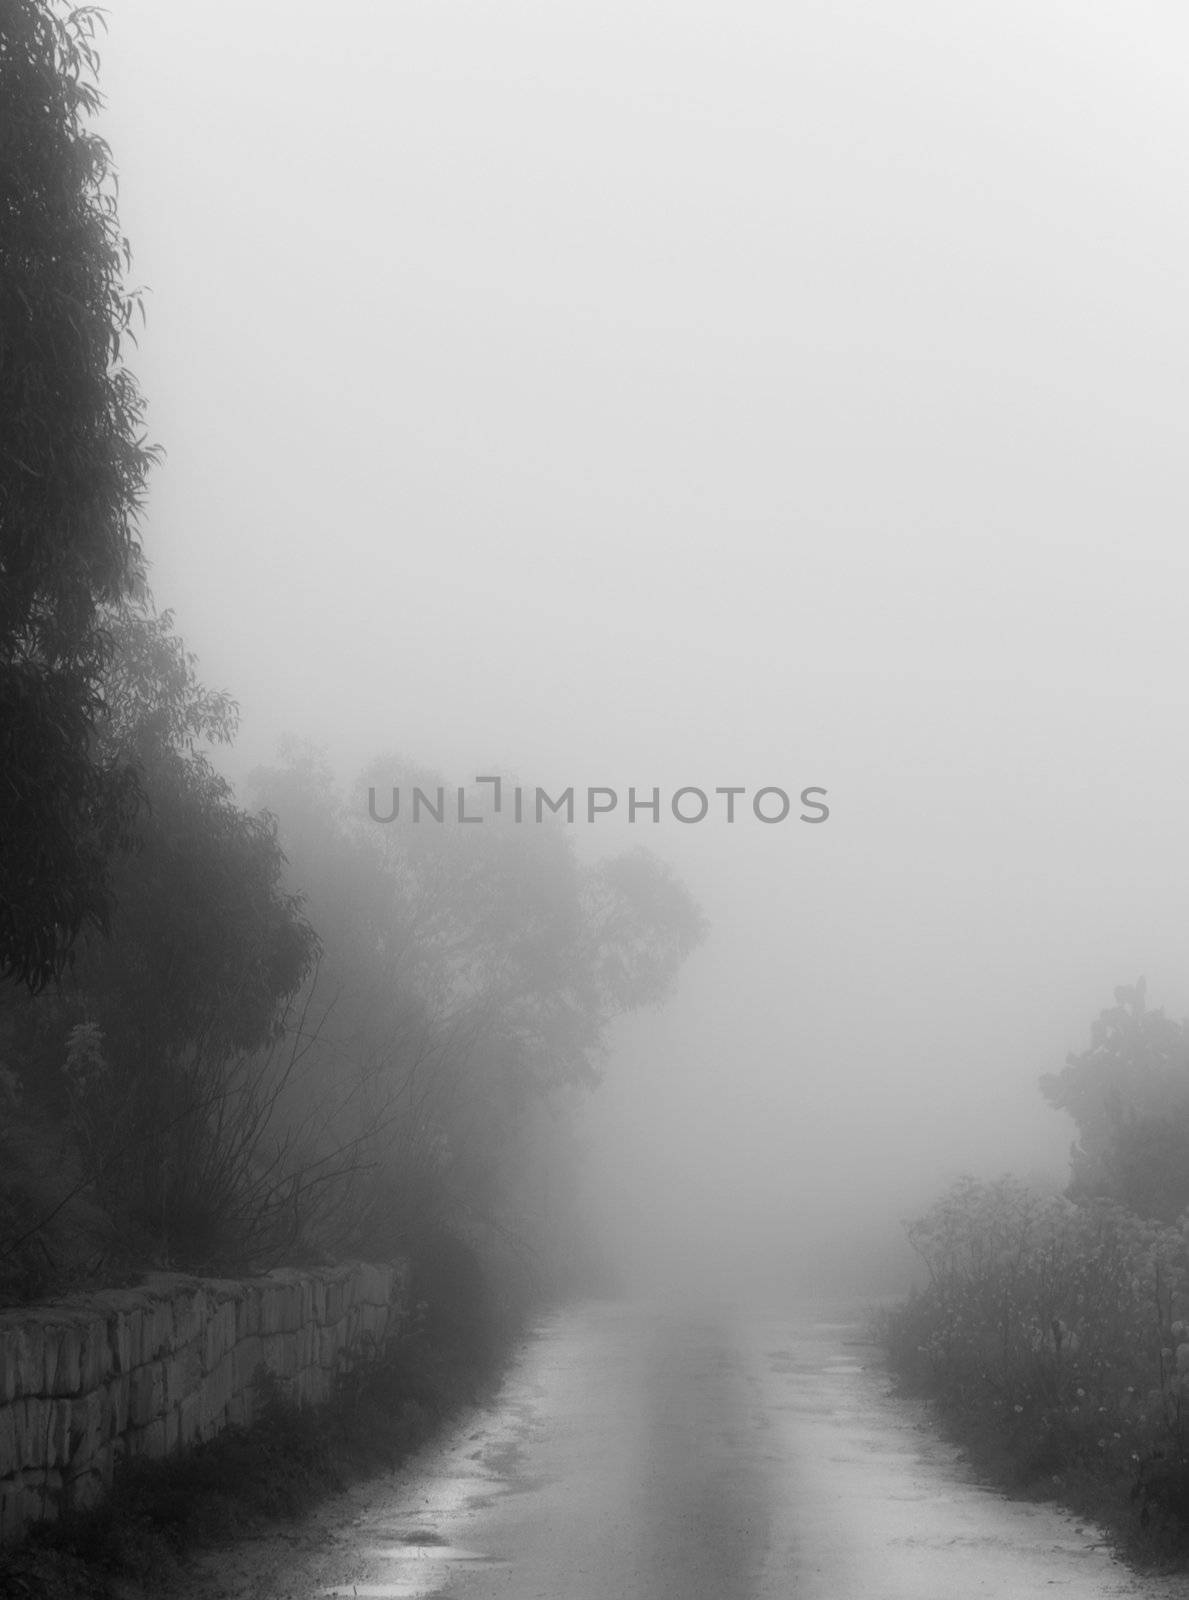 Dense fog enveloping all the surroundings at Dingli Cliffs in Malta on Monday 7th March 2010